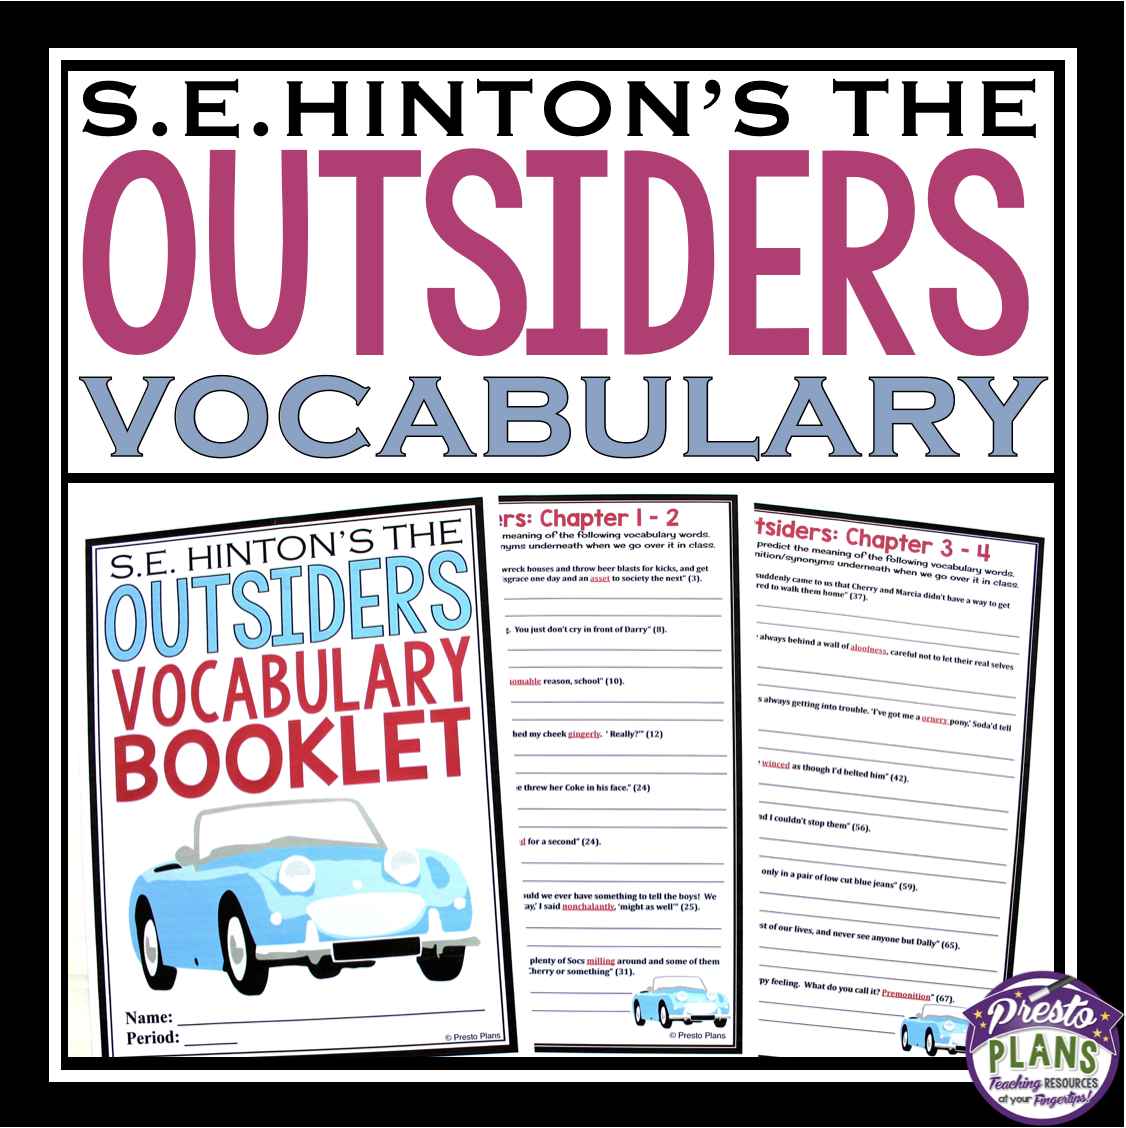 outsiders vocabulary